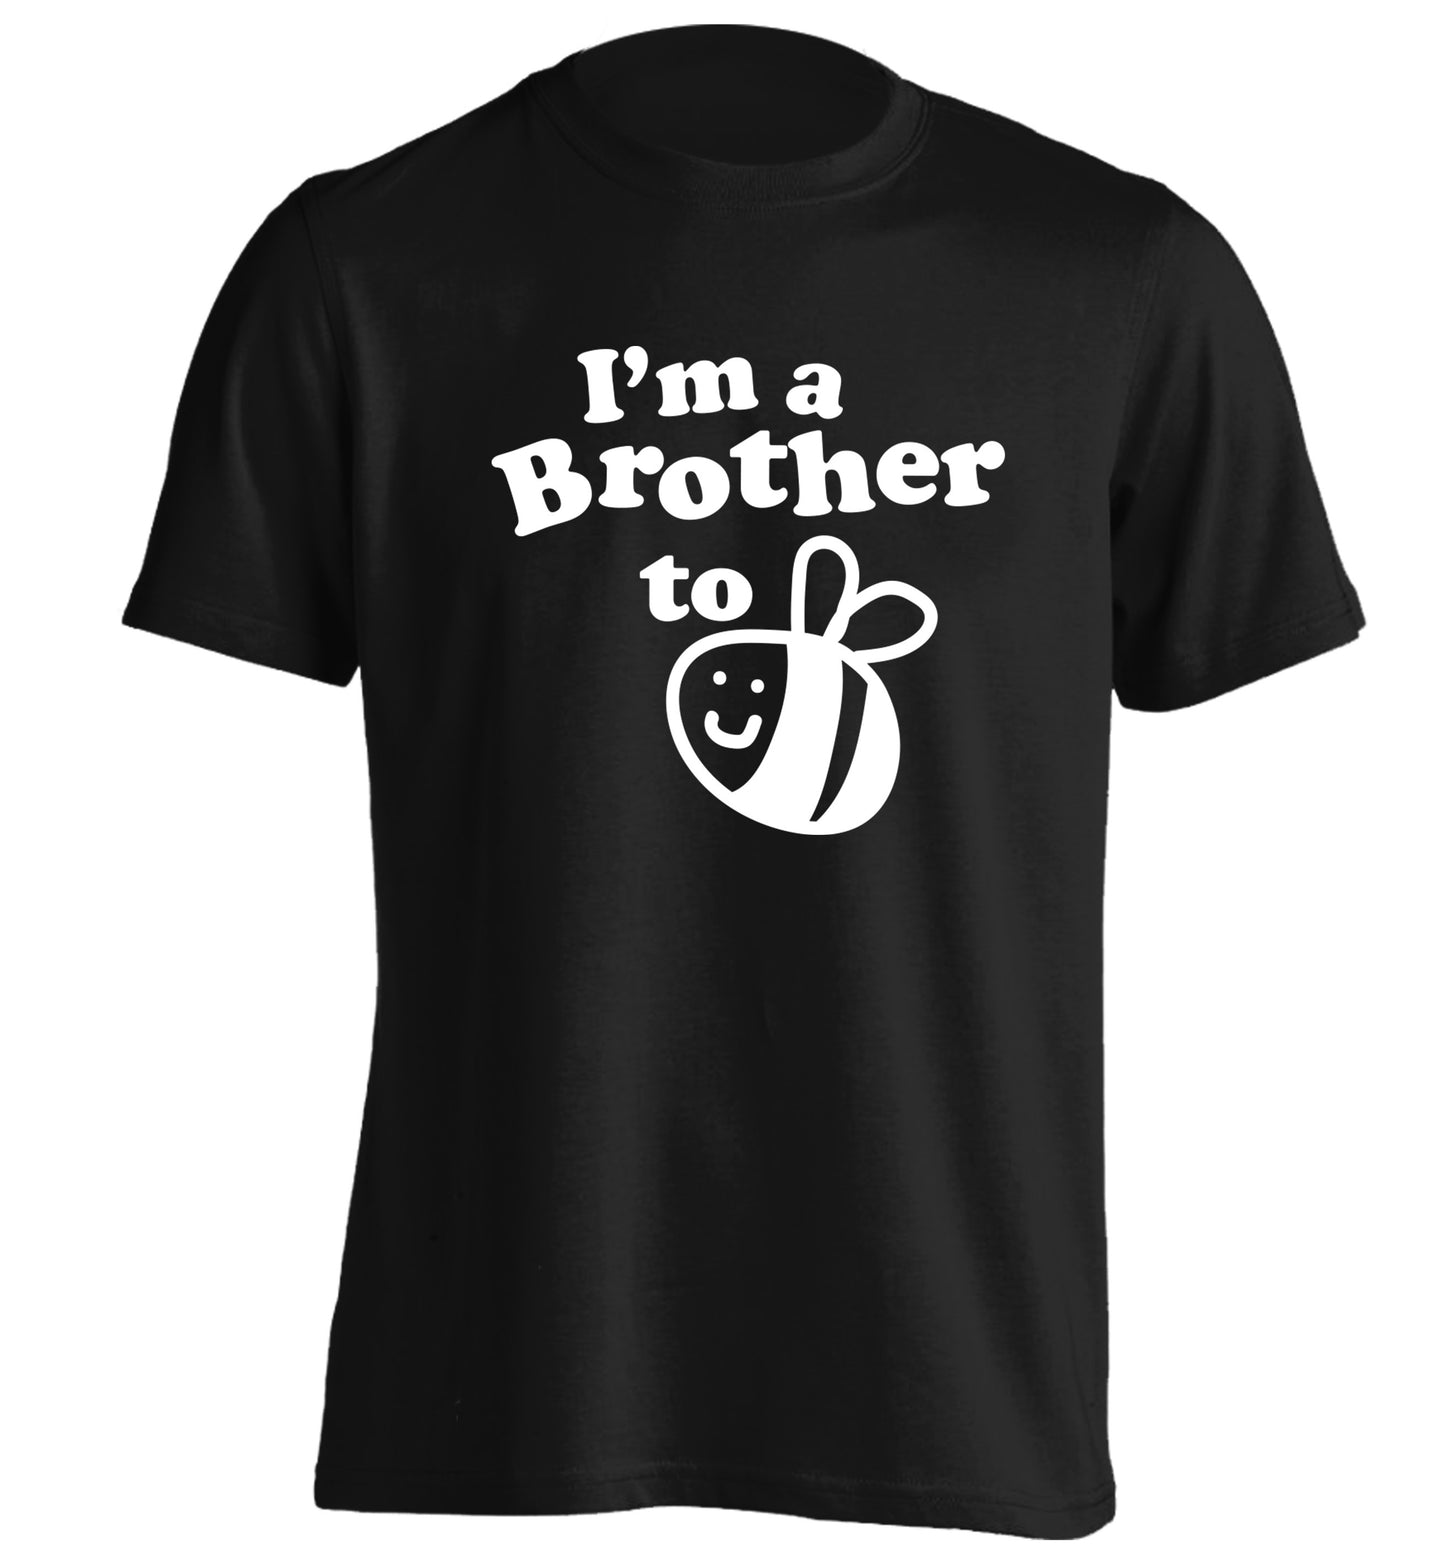 I'm a brother to be adults unisex black Tshirt 2XL